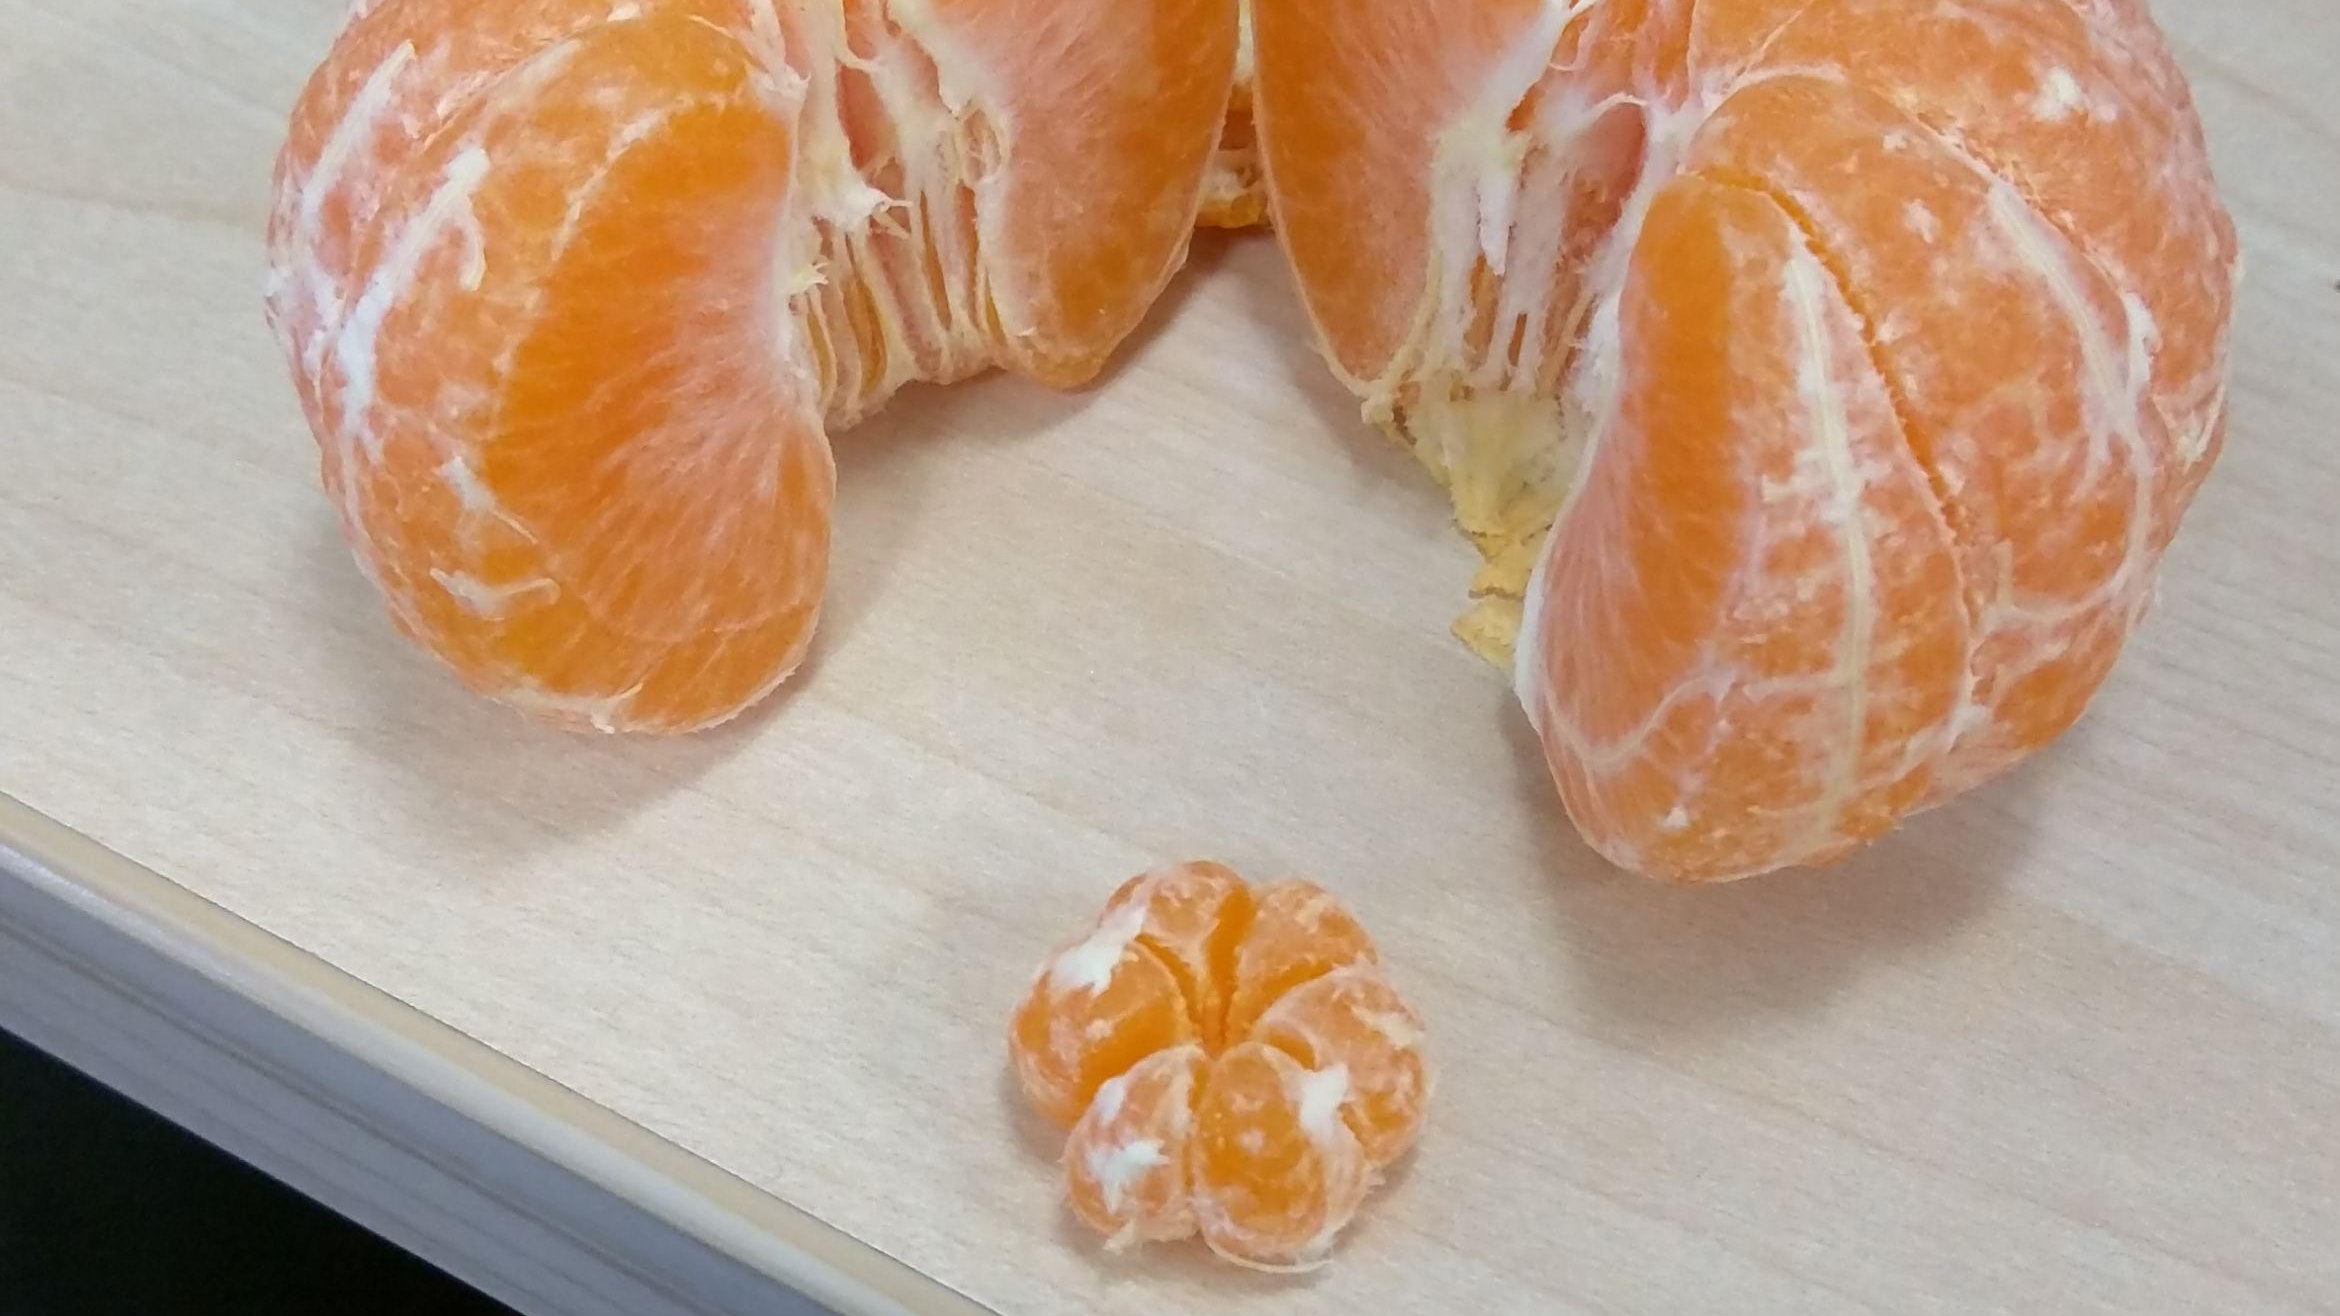 This clementine has a tiny but perfect bonus fruit in the middle | BT